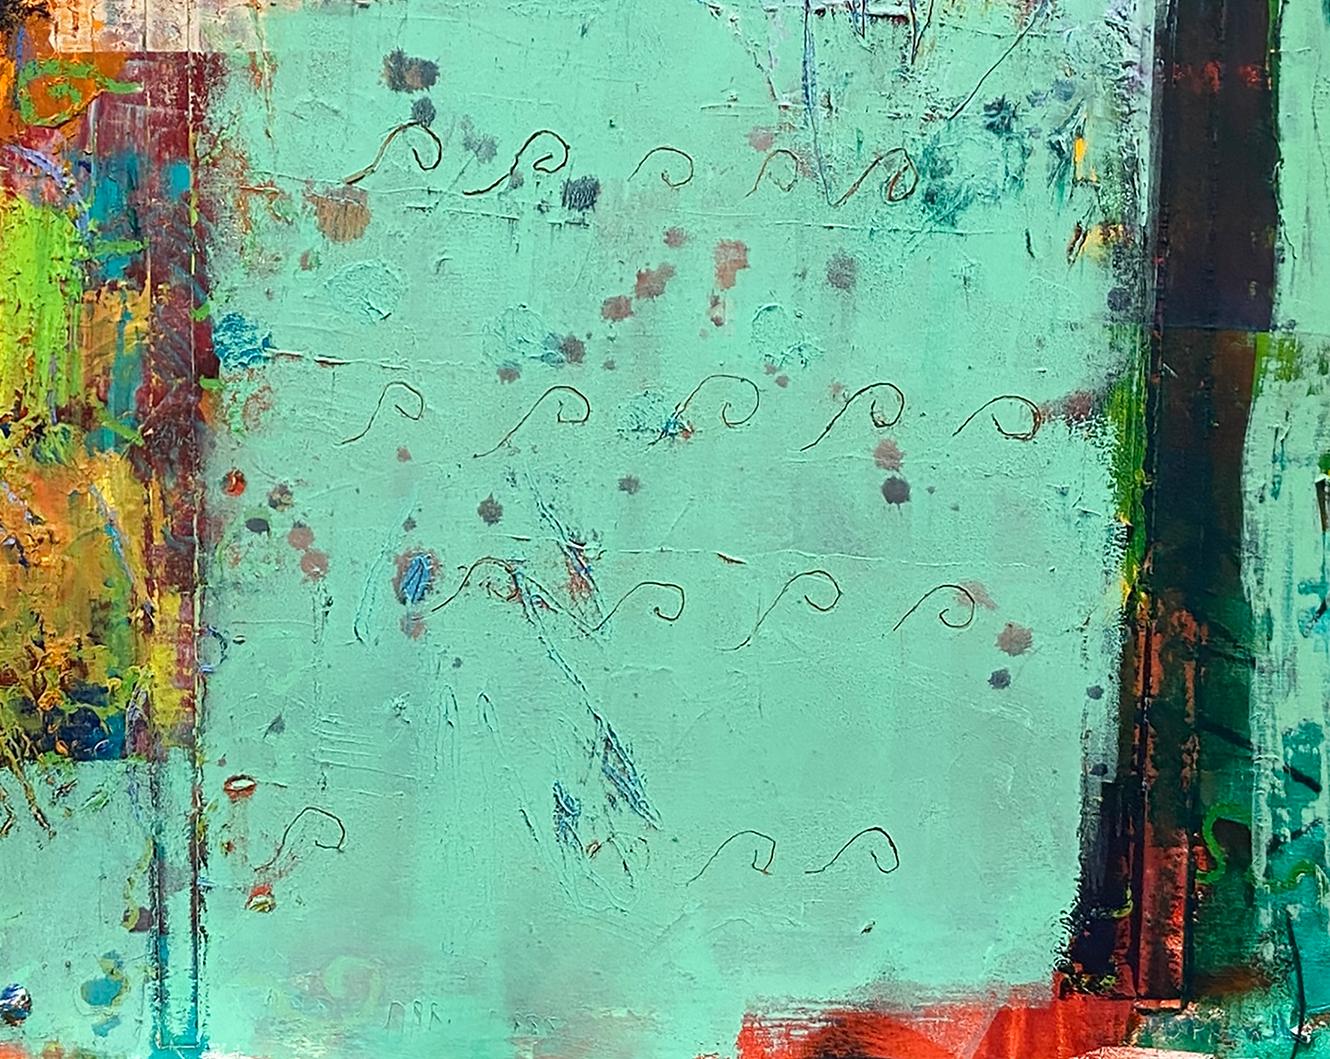 Dredging Up Memories, Original Contemporary Aquamarine and Red Abstract Painting
24